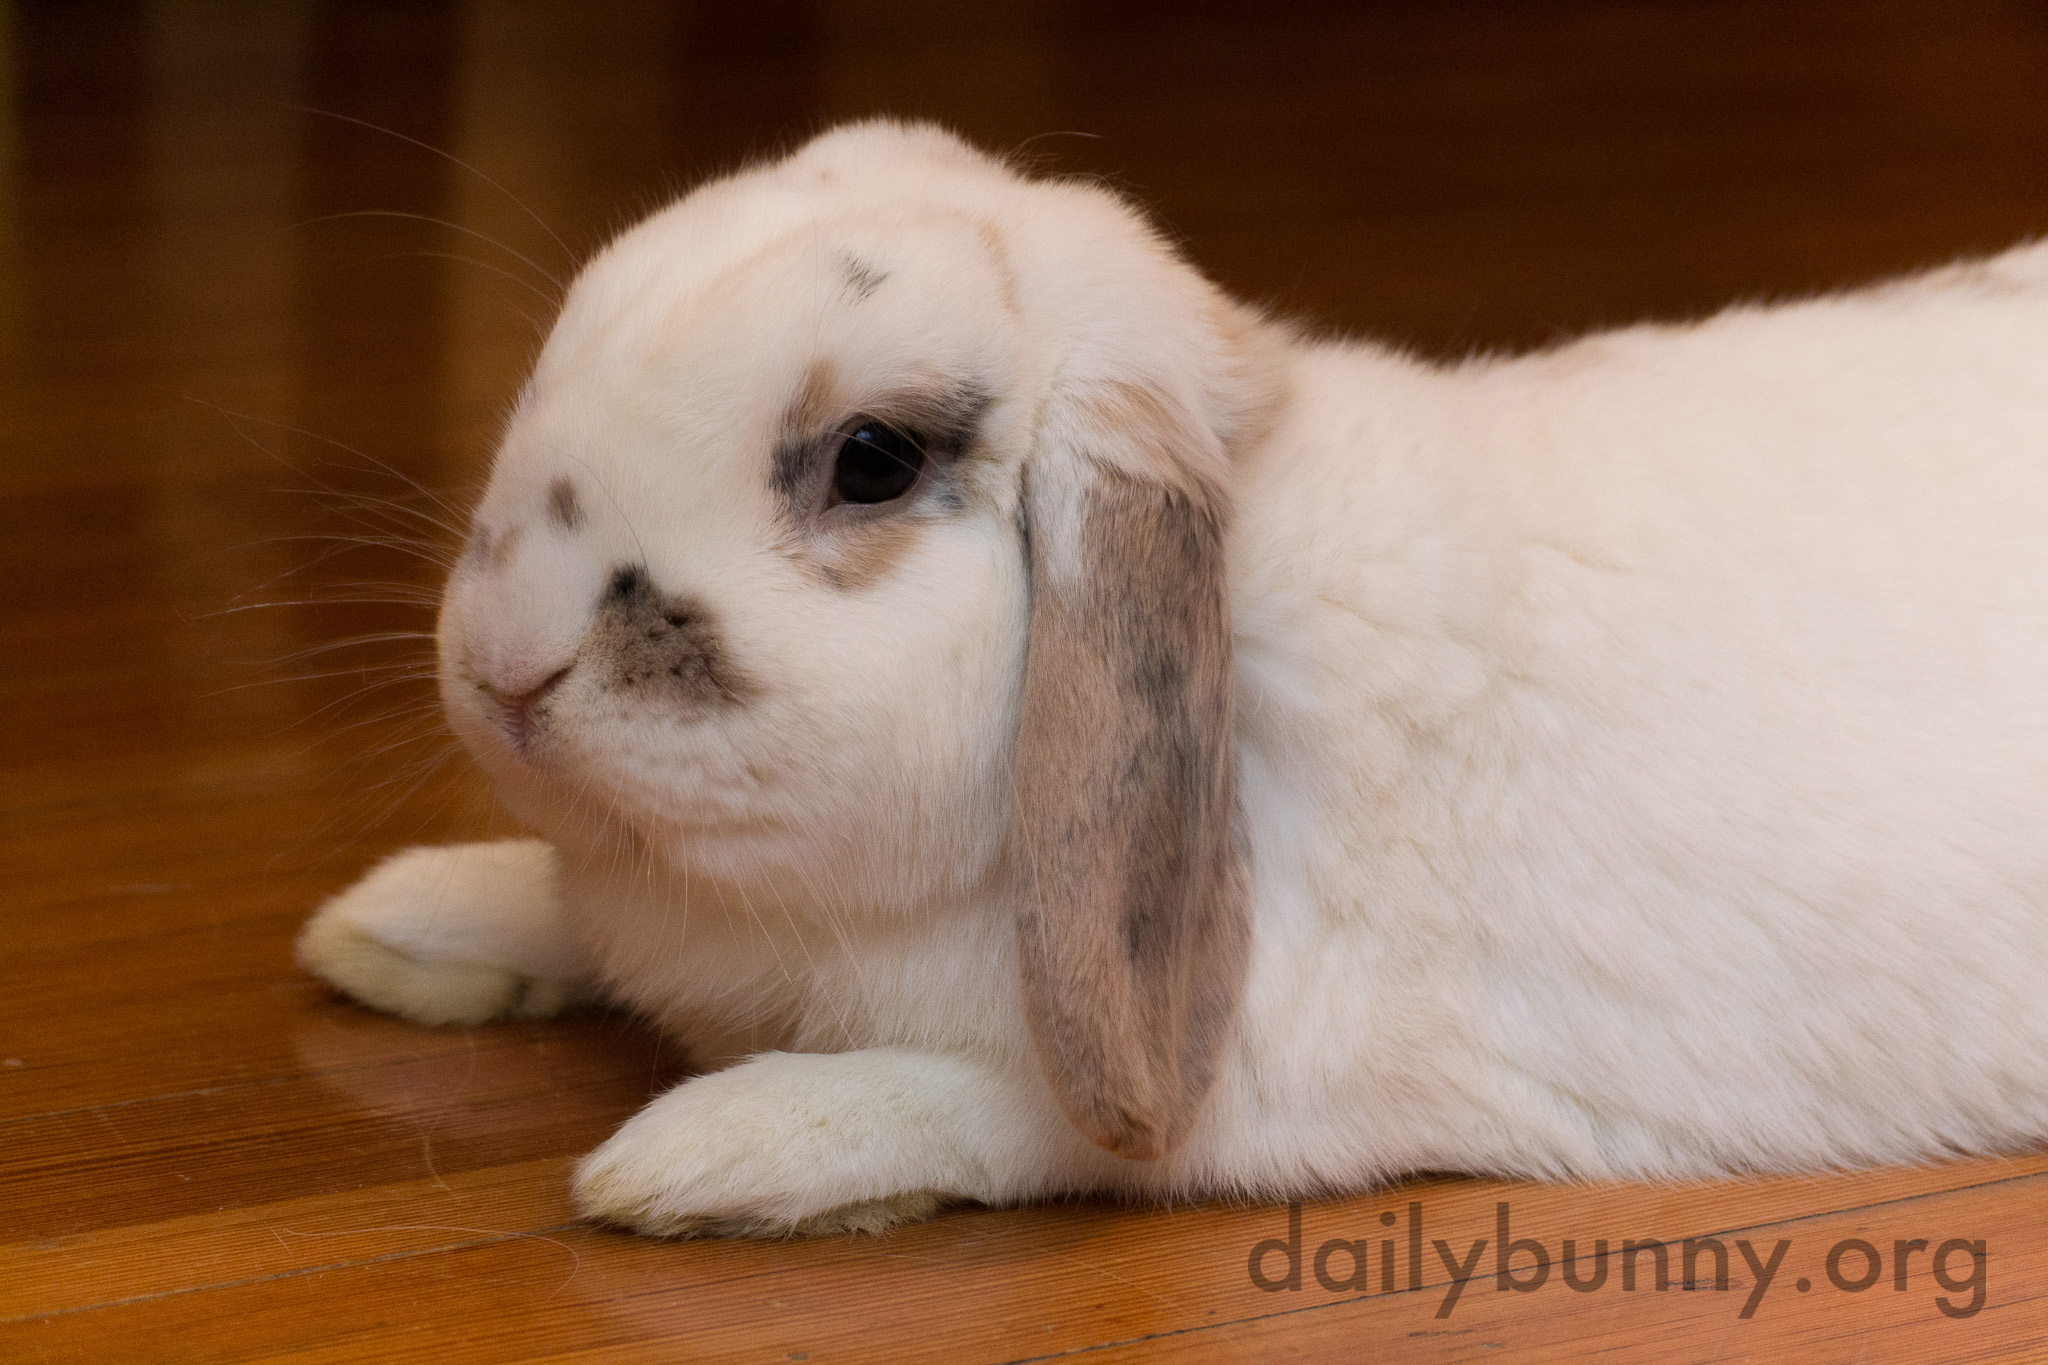 Bunny Cools Down on the Floor Before Jumping Back Up to Run Around Again